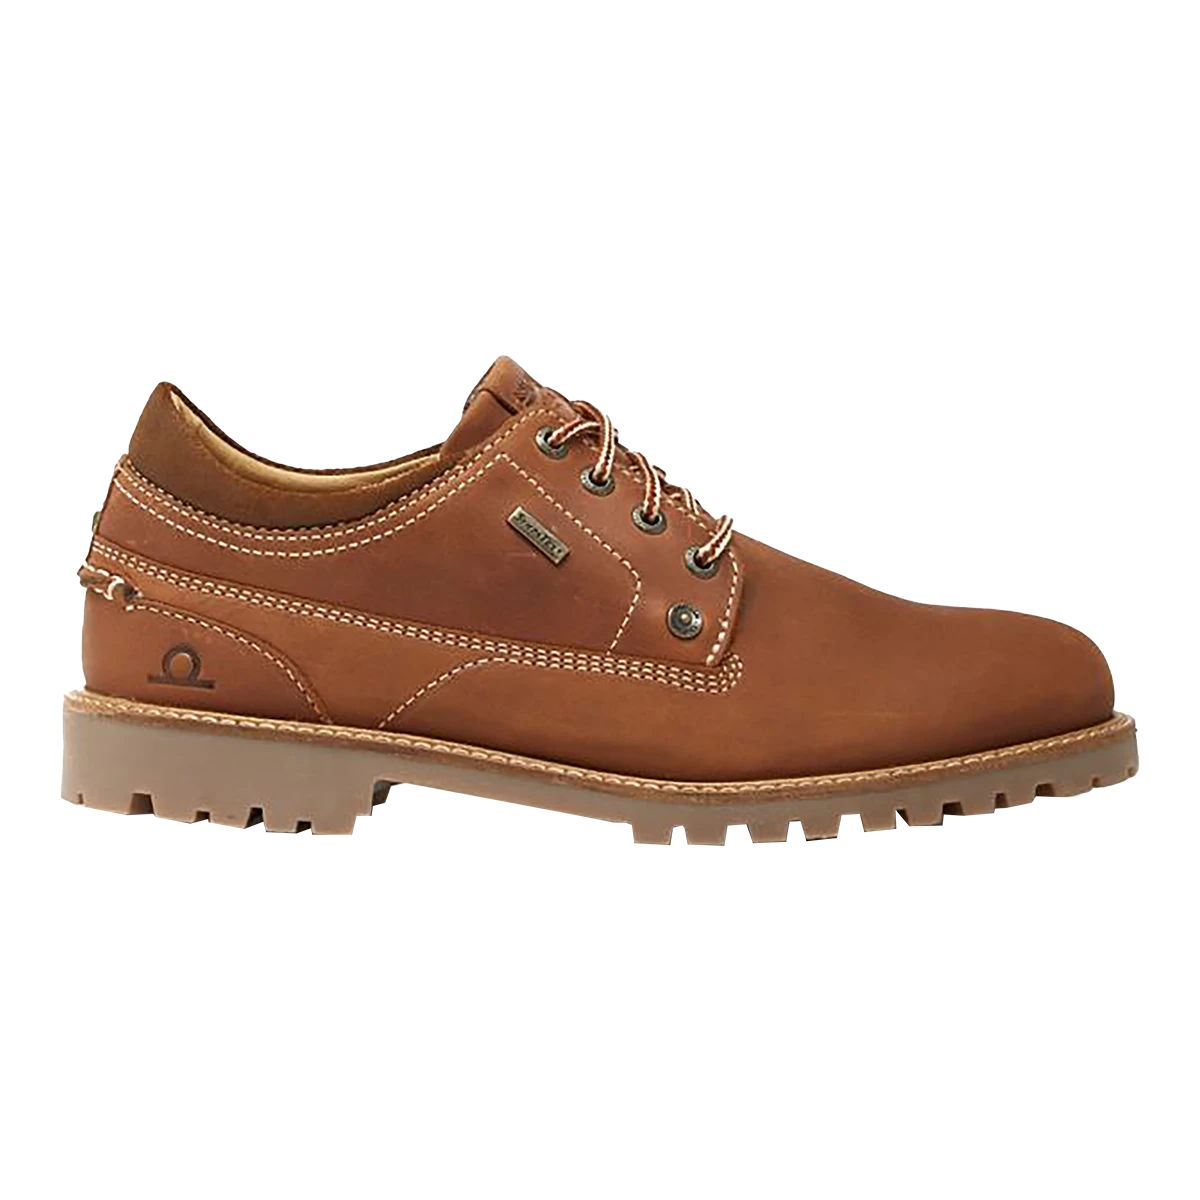 Chatham Raby Waterproof Shoes for Men